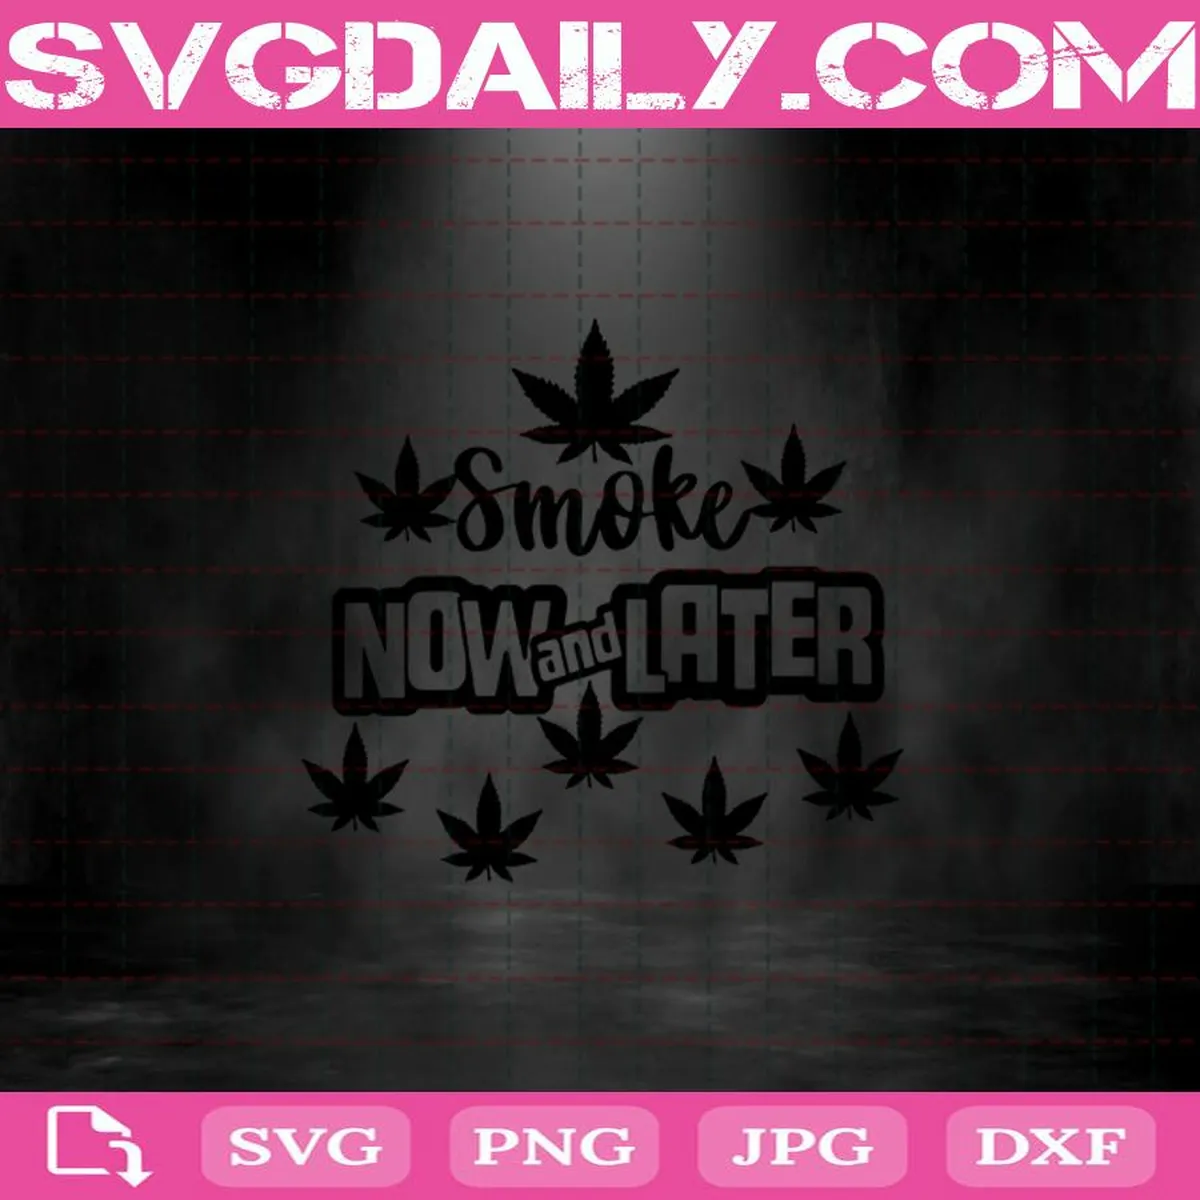 Weed Smoke Now And Later Svg, Weed Pot Leaf Marijuana Cannabis Svg, Marijuana Svg, Weed Smoke Svg, Cannabis Svg